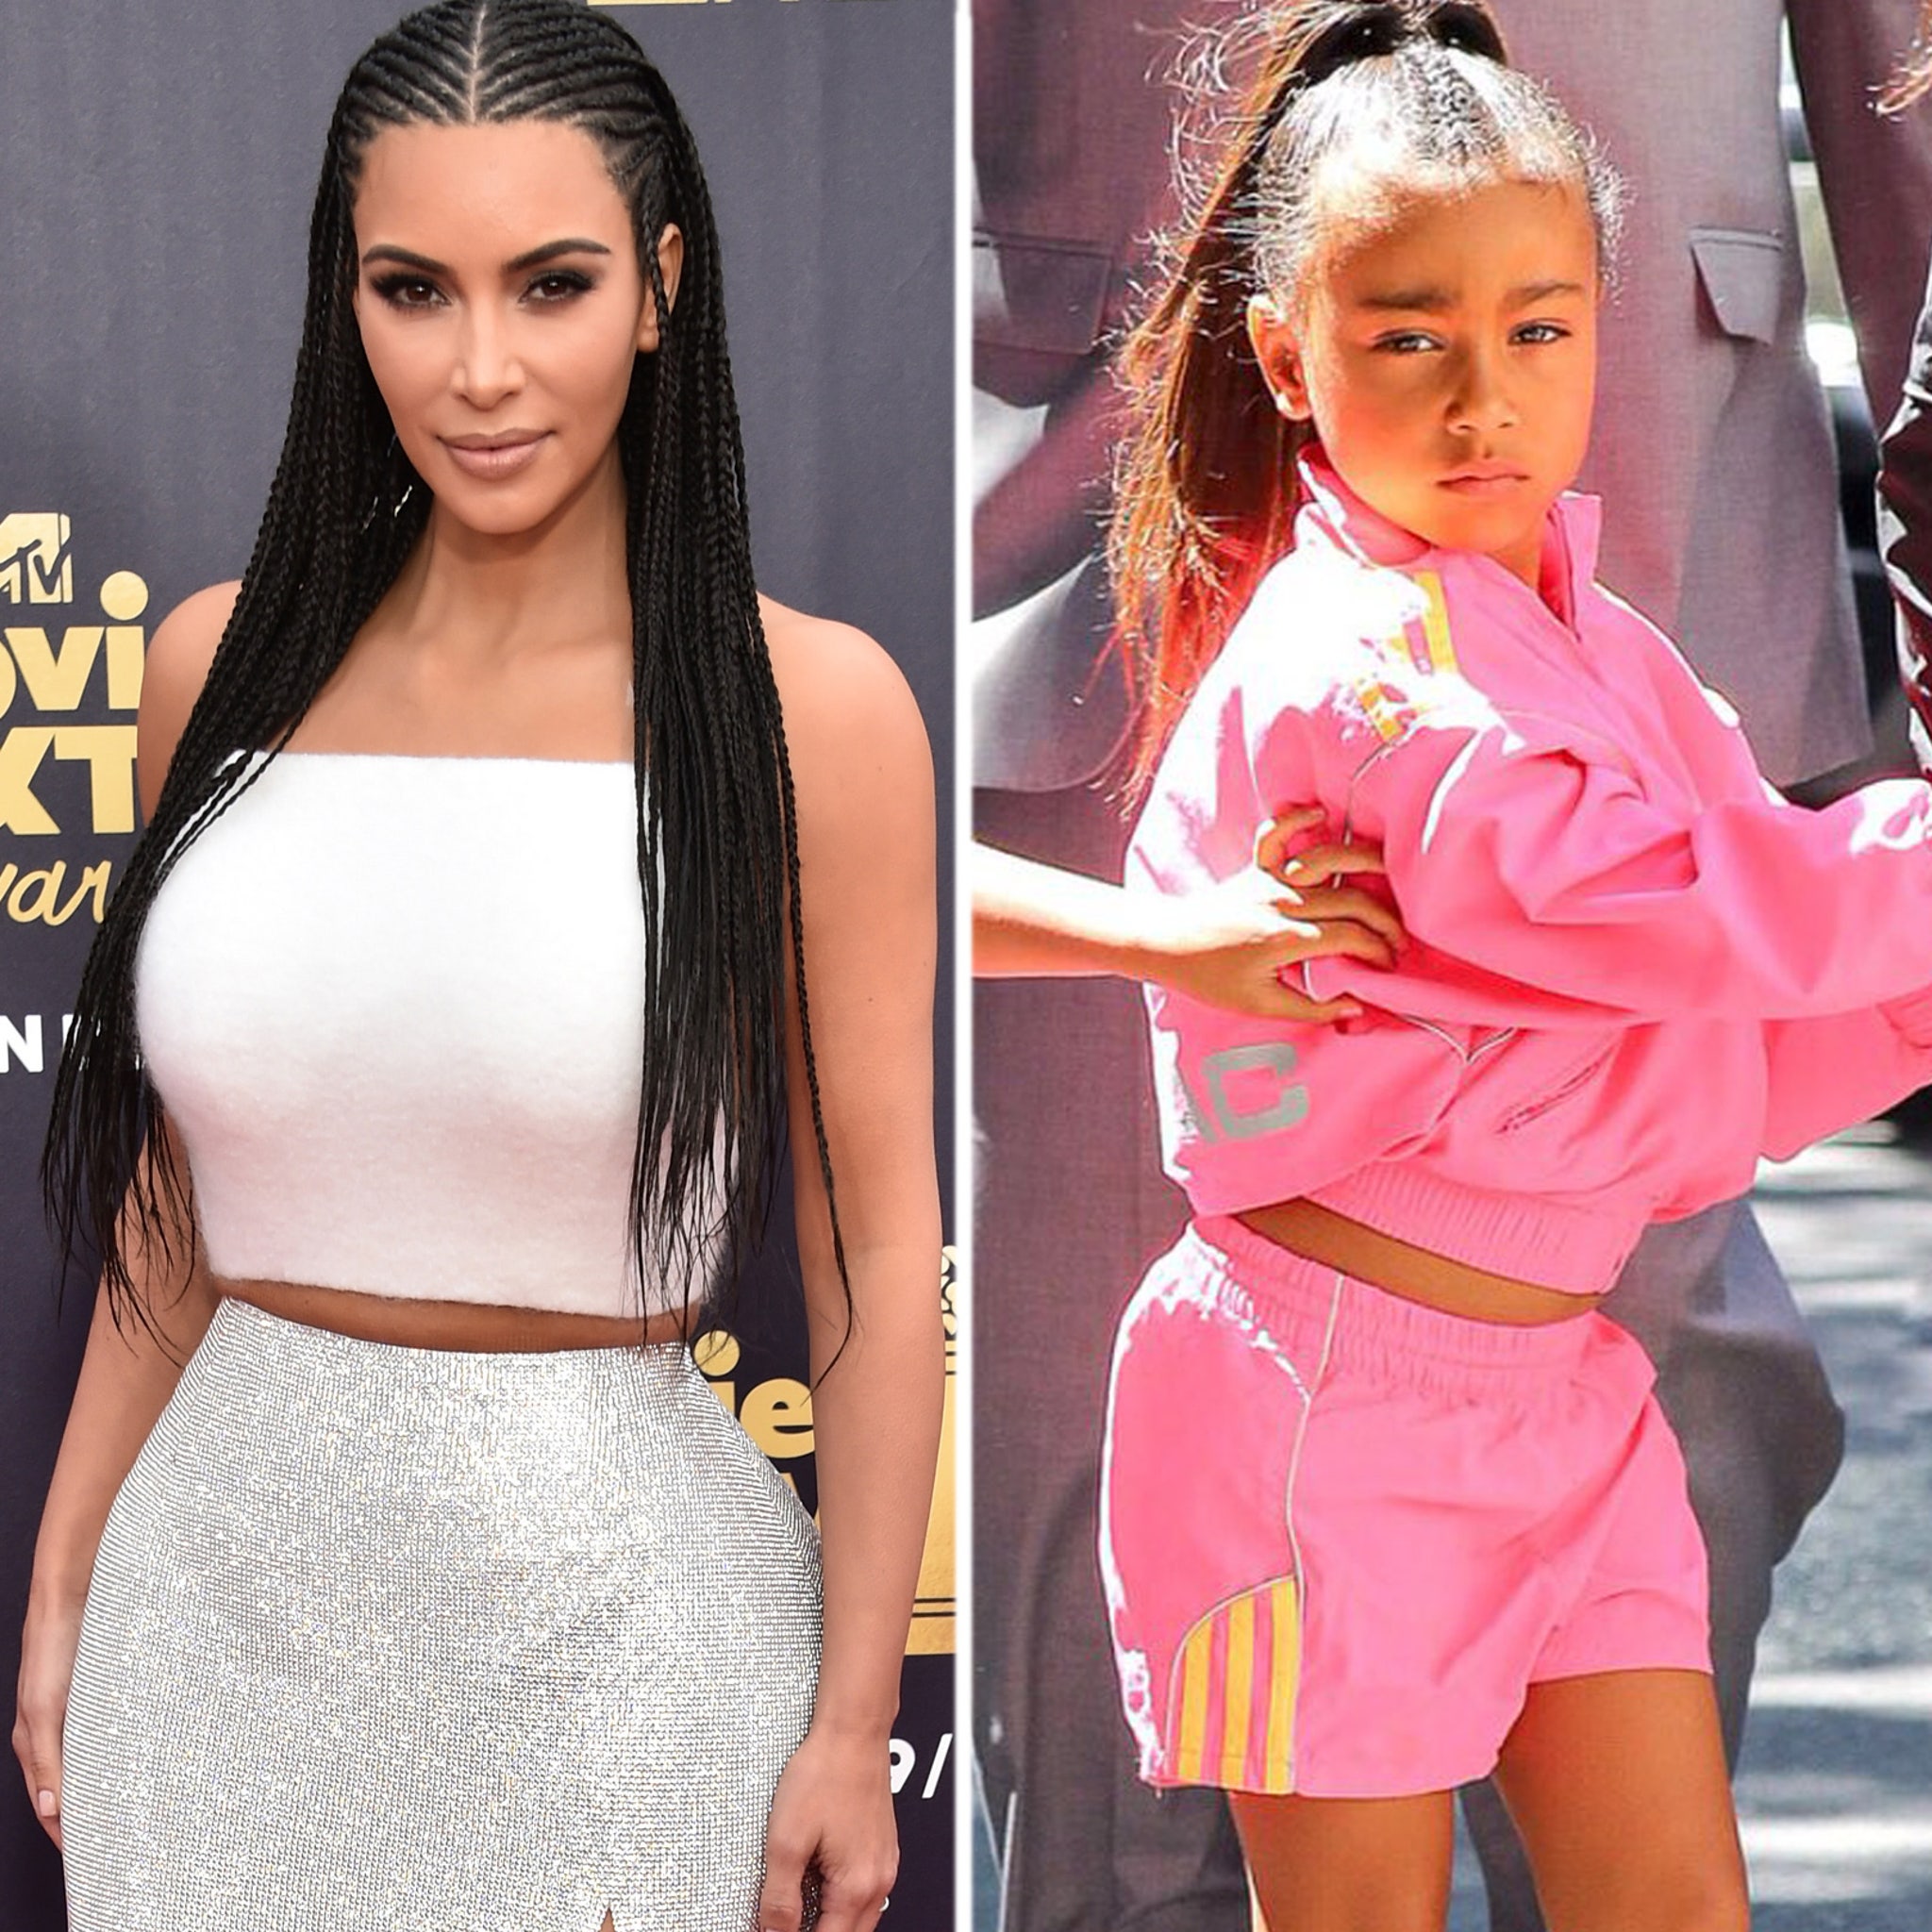 NORTH WEST IS THE REASON FOR KIM KARDASHIAN'S FULANI BRAIDS AT THE